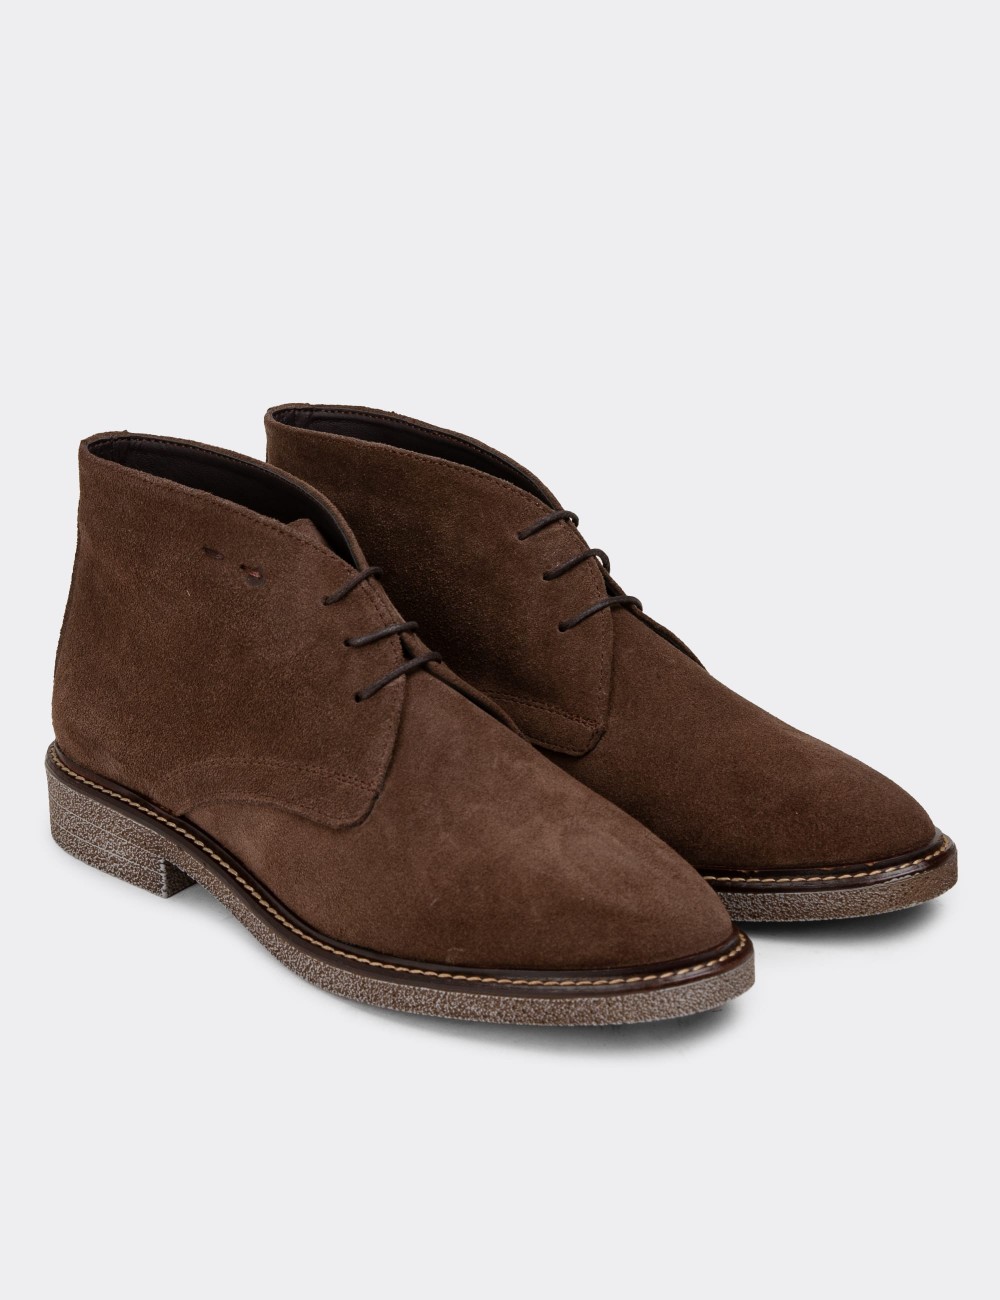 Brown Suede Leather Desert Boots - 01967ZKHVC02